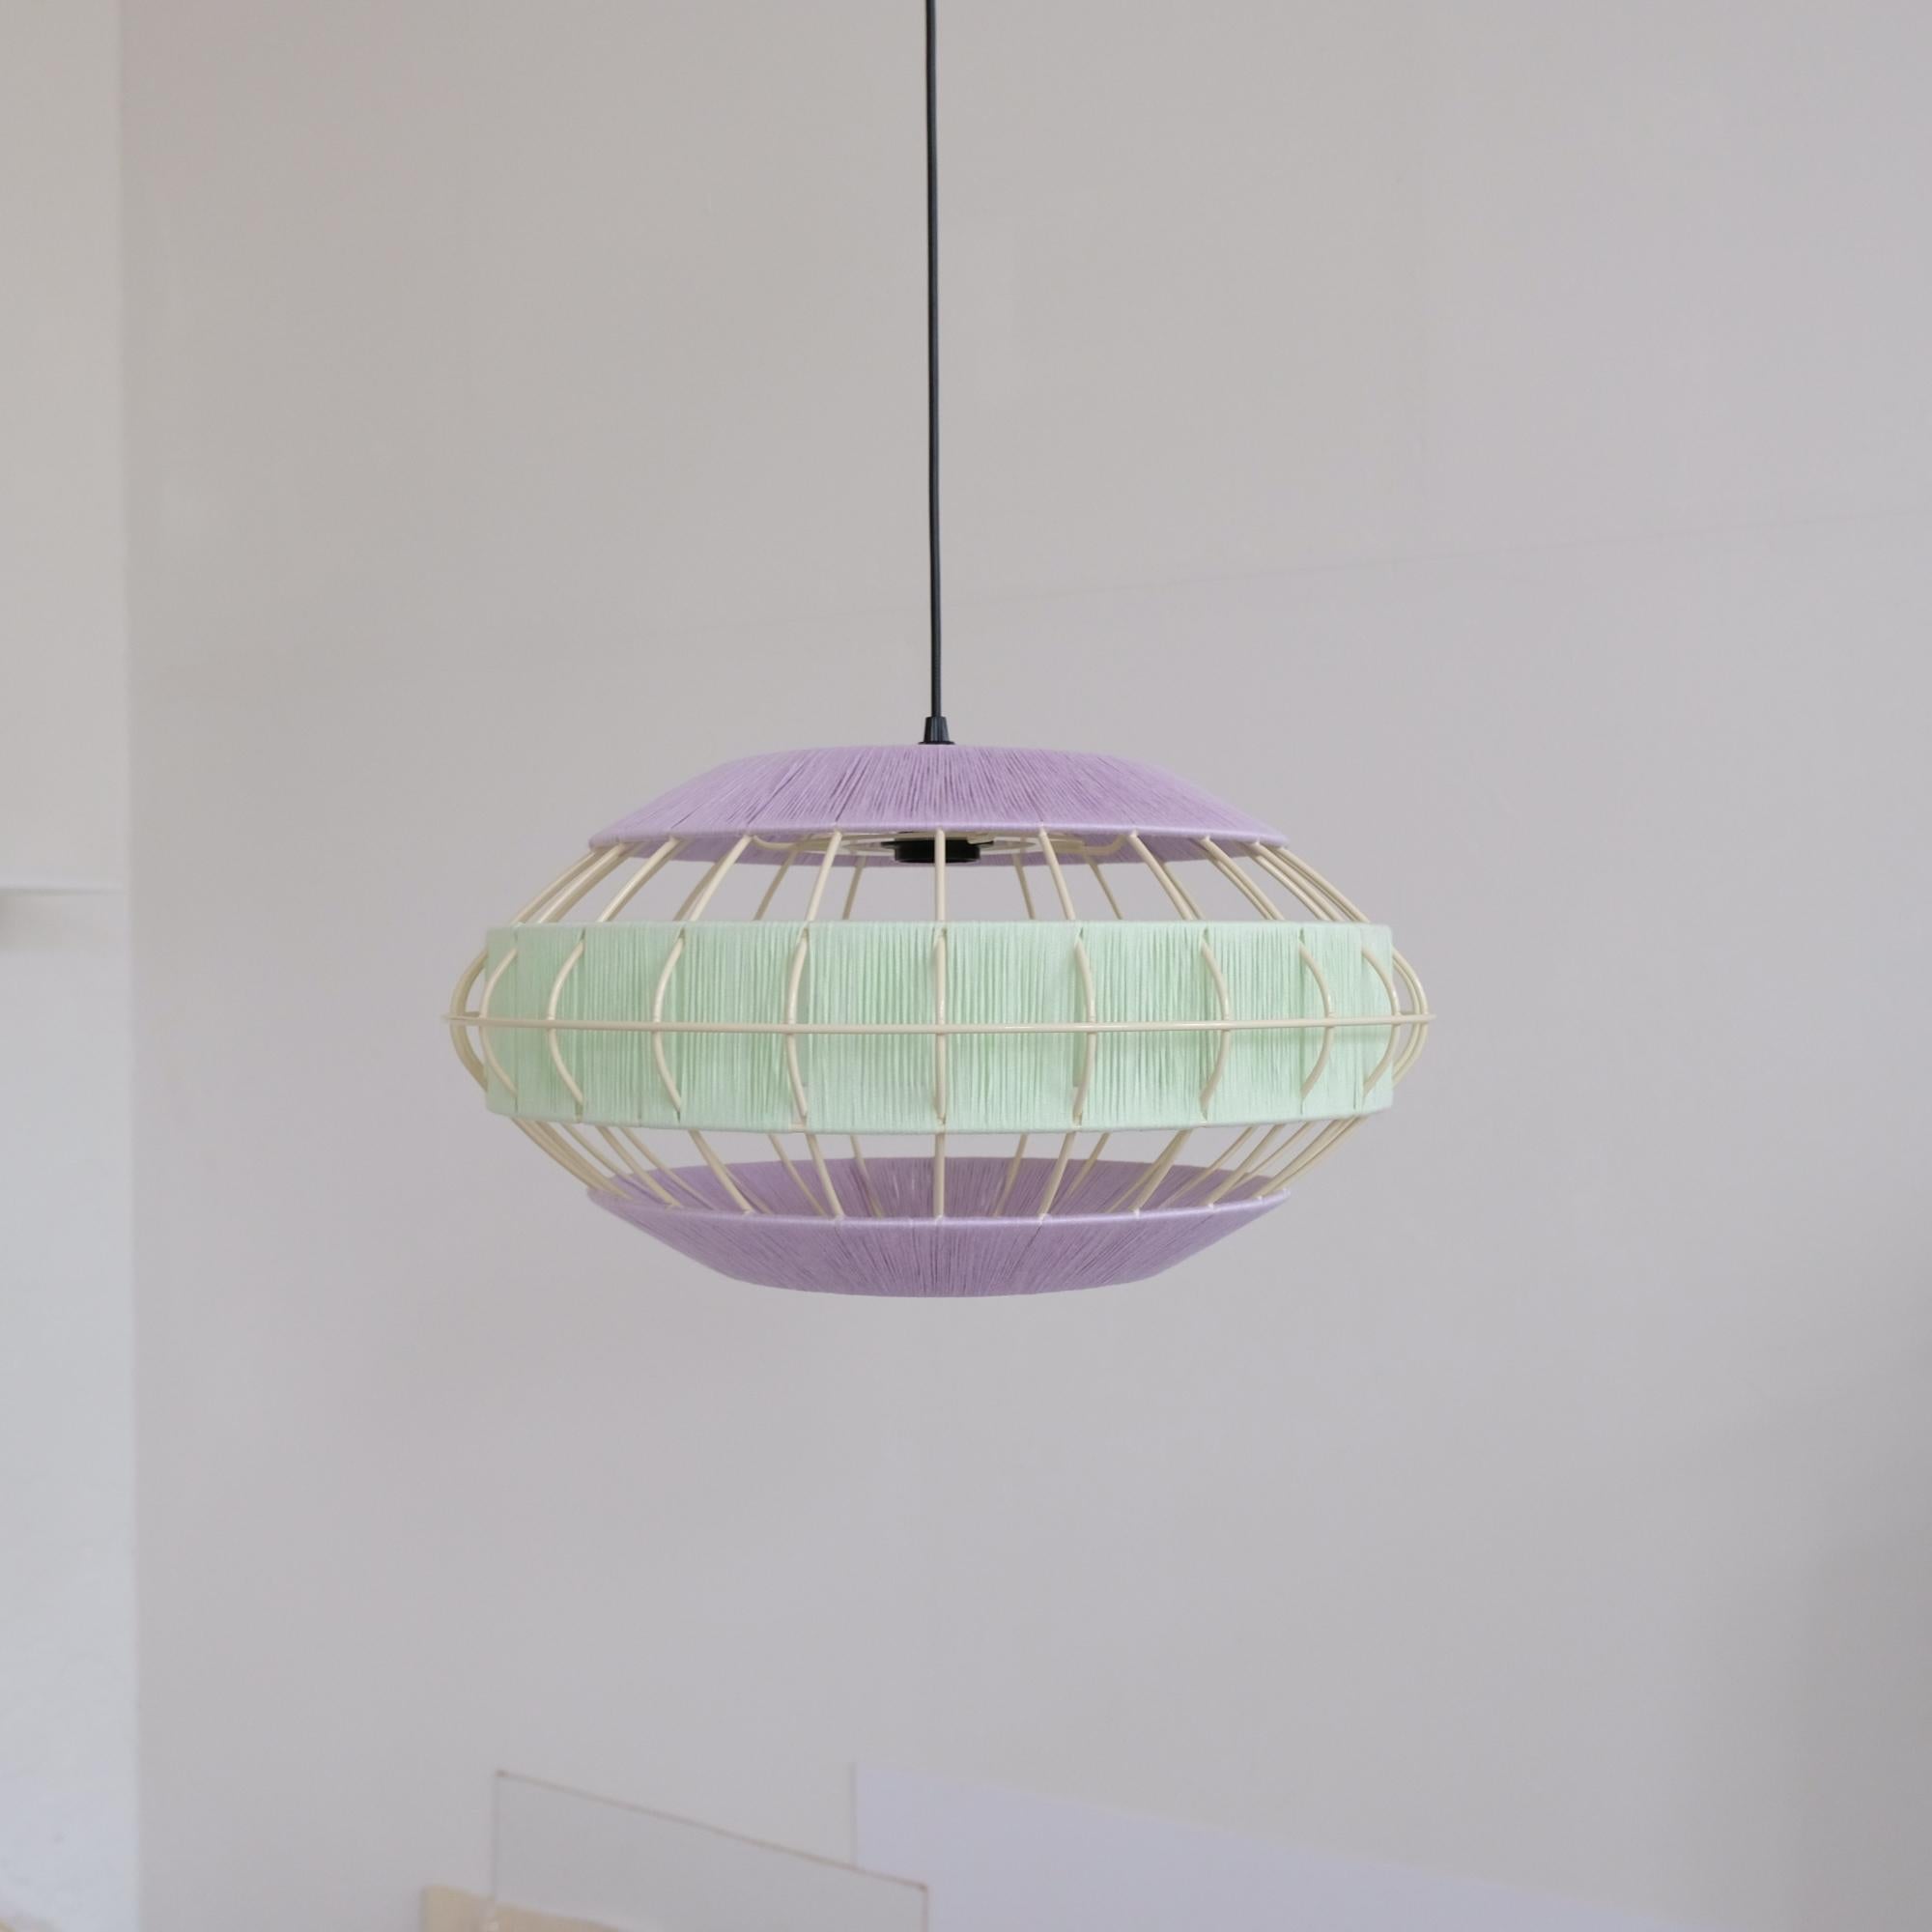 This piece of from a limited collection of 5 worldwide.
It is handmade in WeraJane`Studio.
The lampshade is made of steel and produced locally.
It is ready to ship asap.
Please note this item is 2kg.